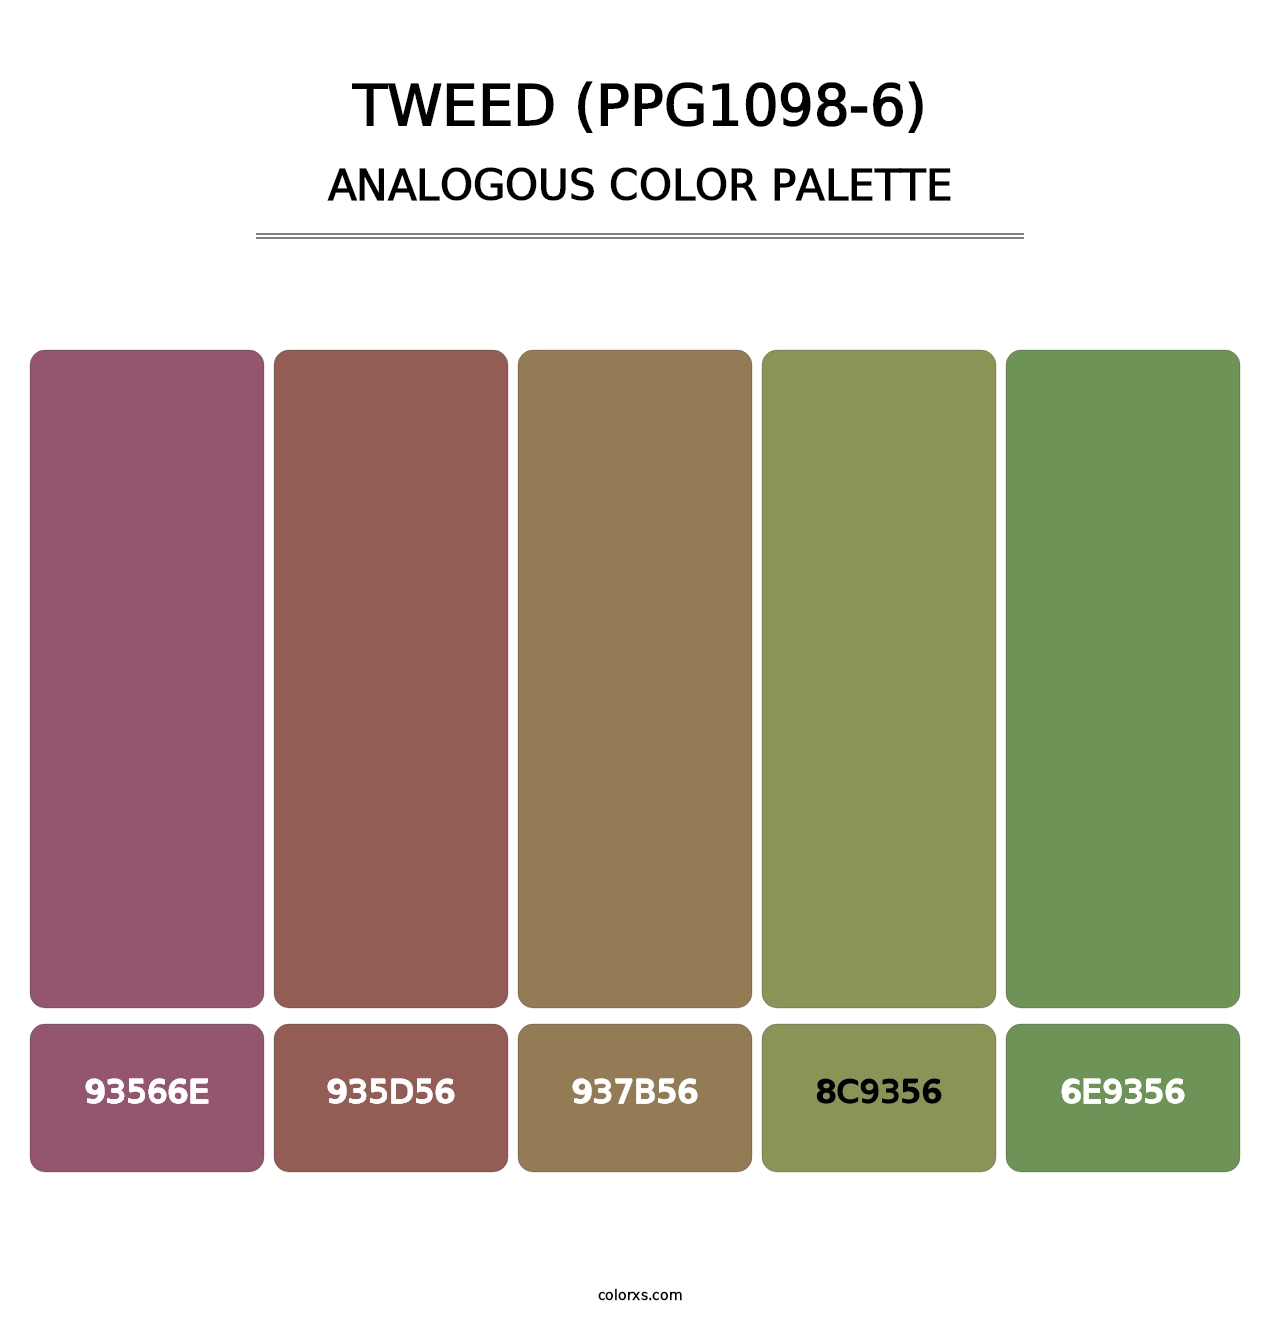 Tweed (PPG1098-6) - Analogous Color Palette